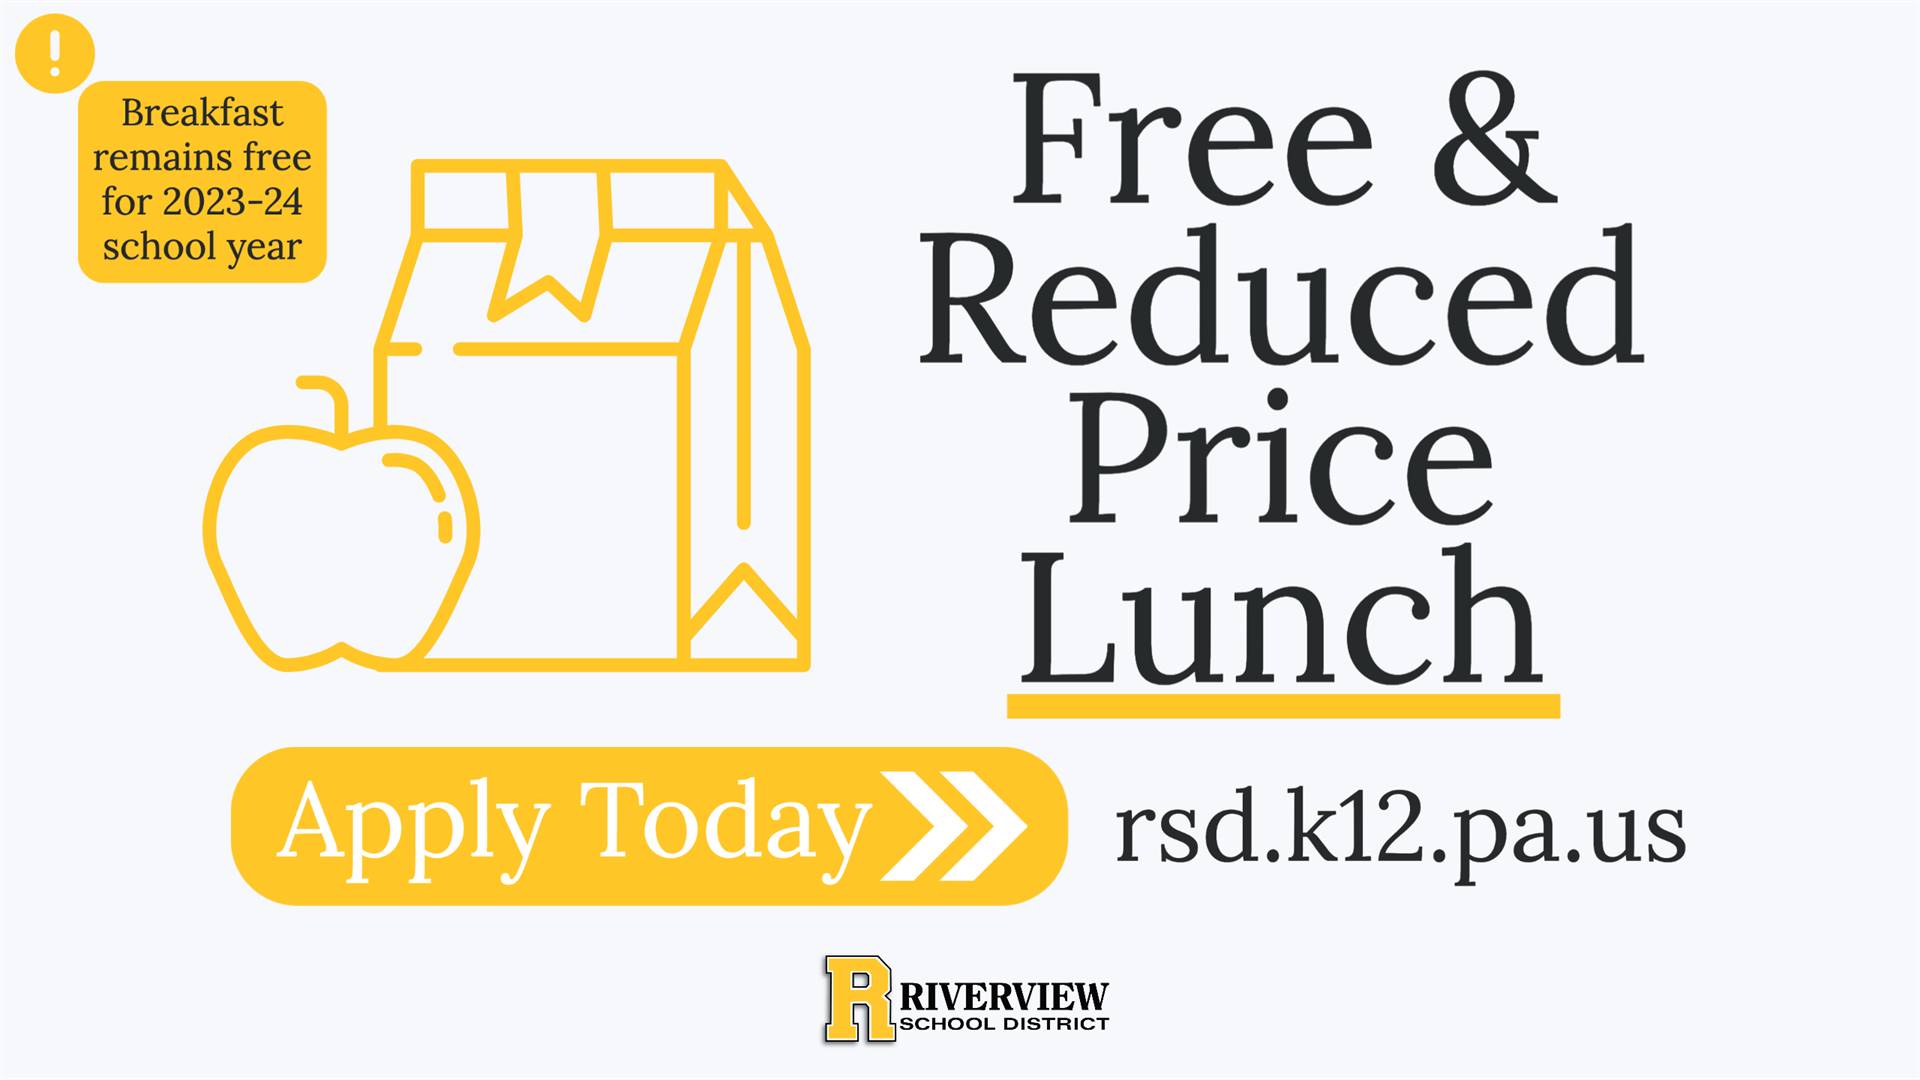 Free & Reduced Price Lunch Application